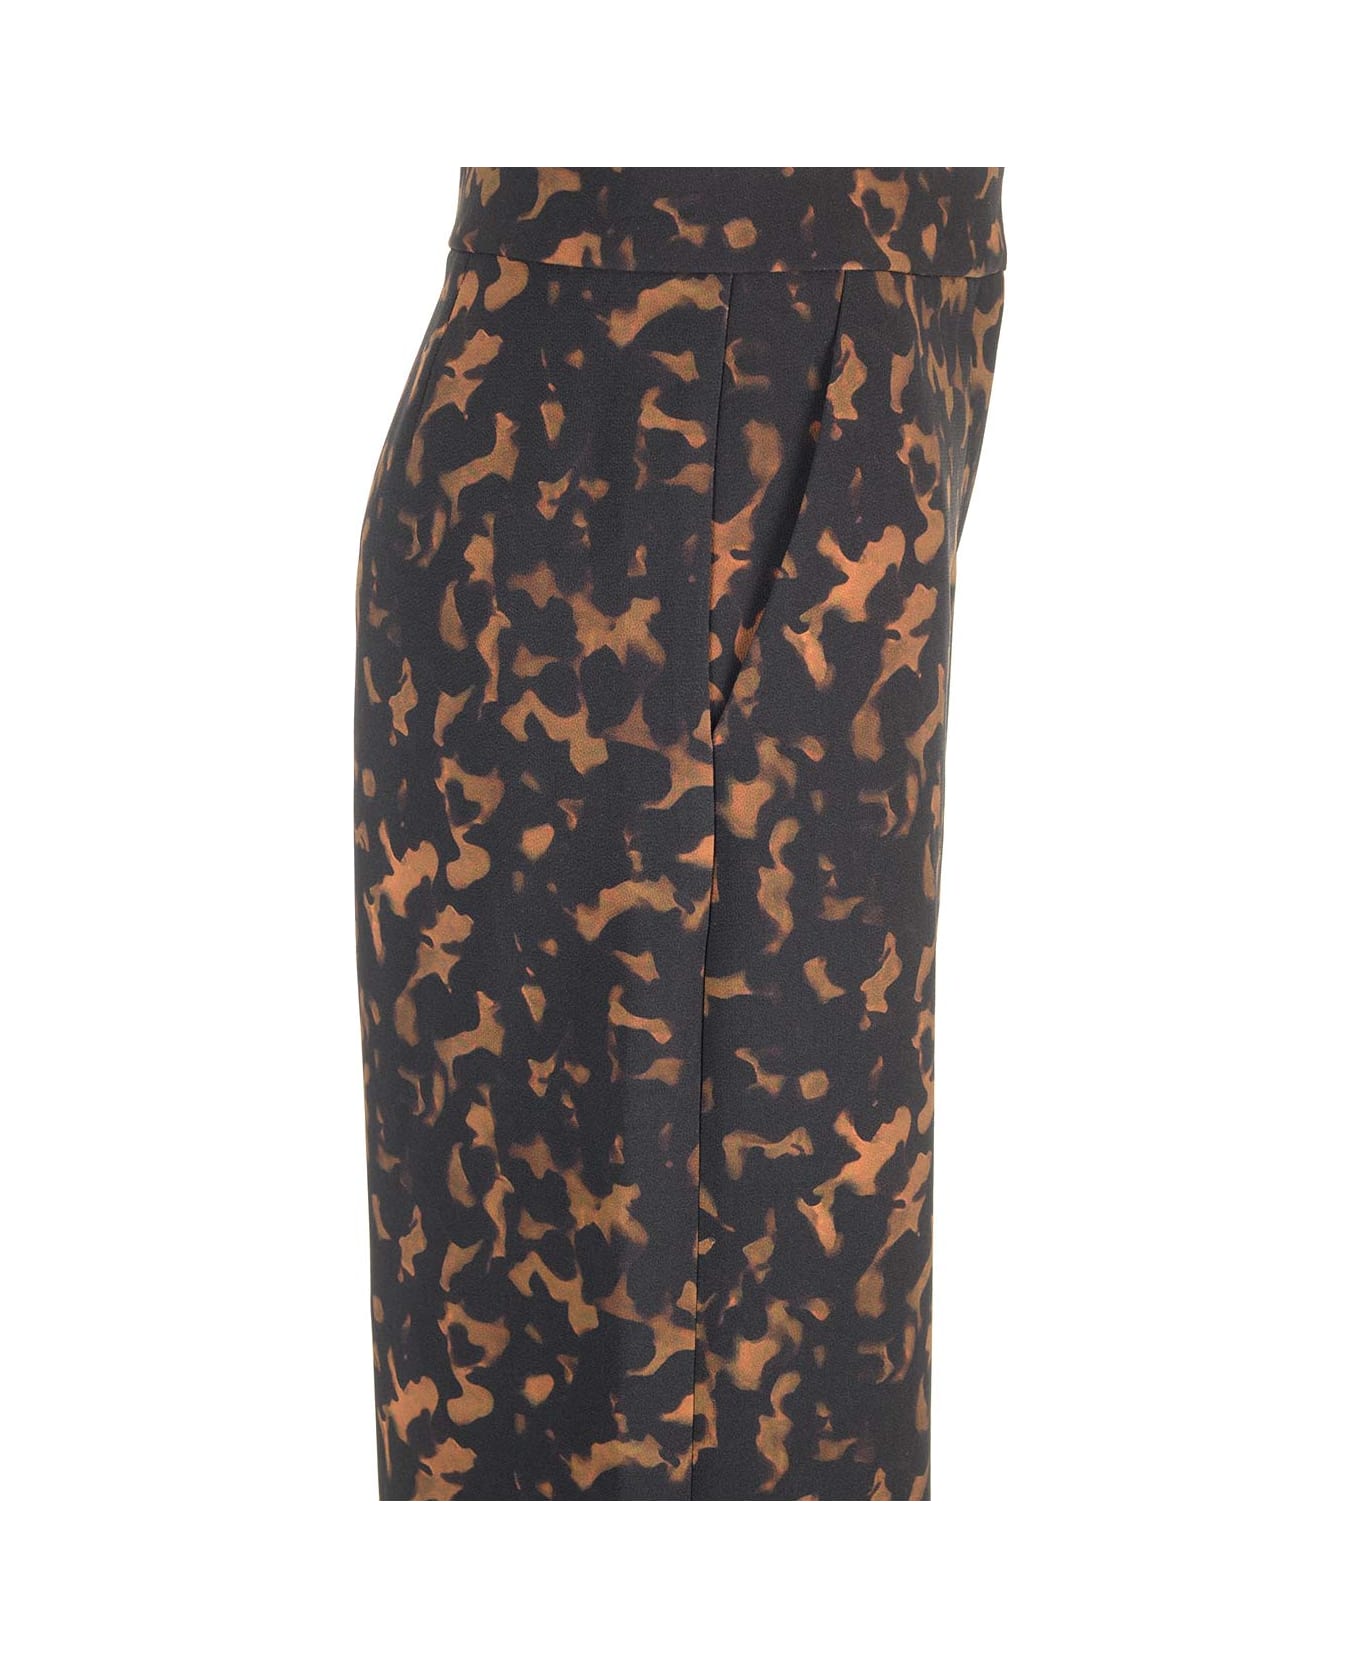 Theory High Waisted Pants - Dkh Dark Brown Multi